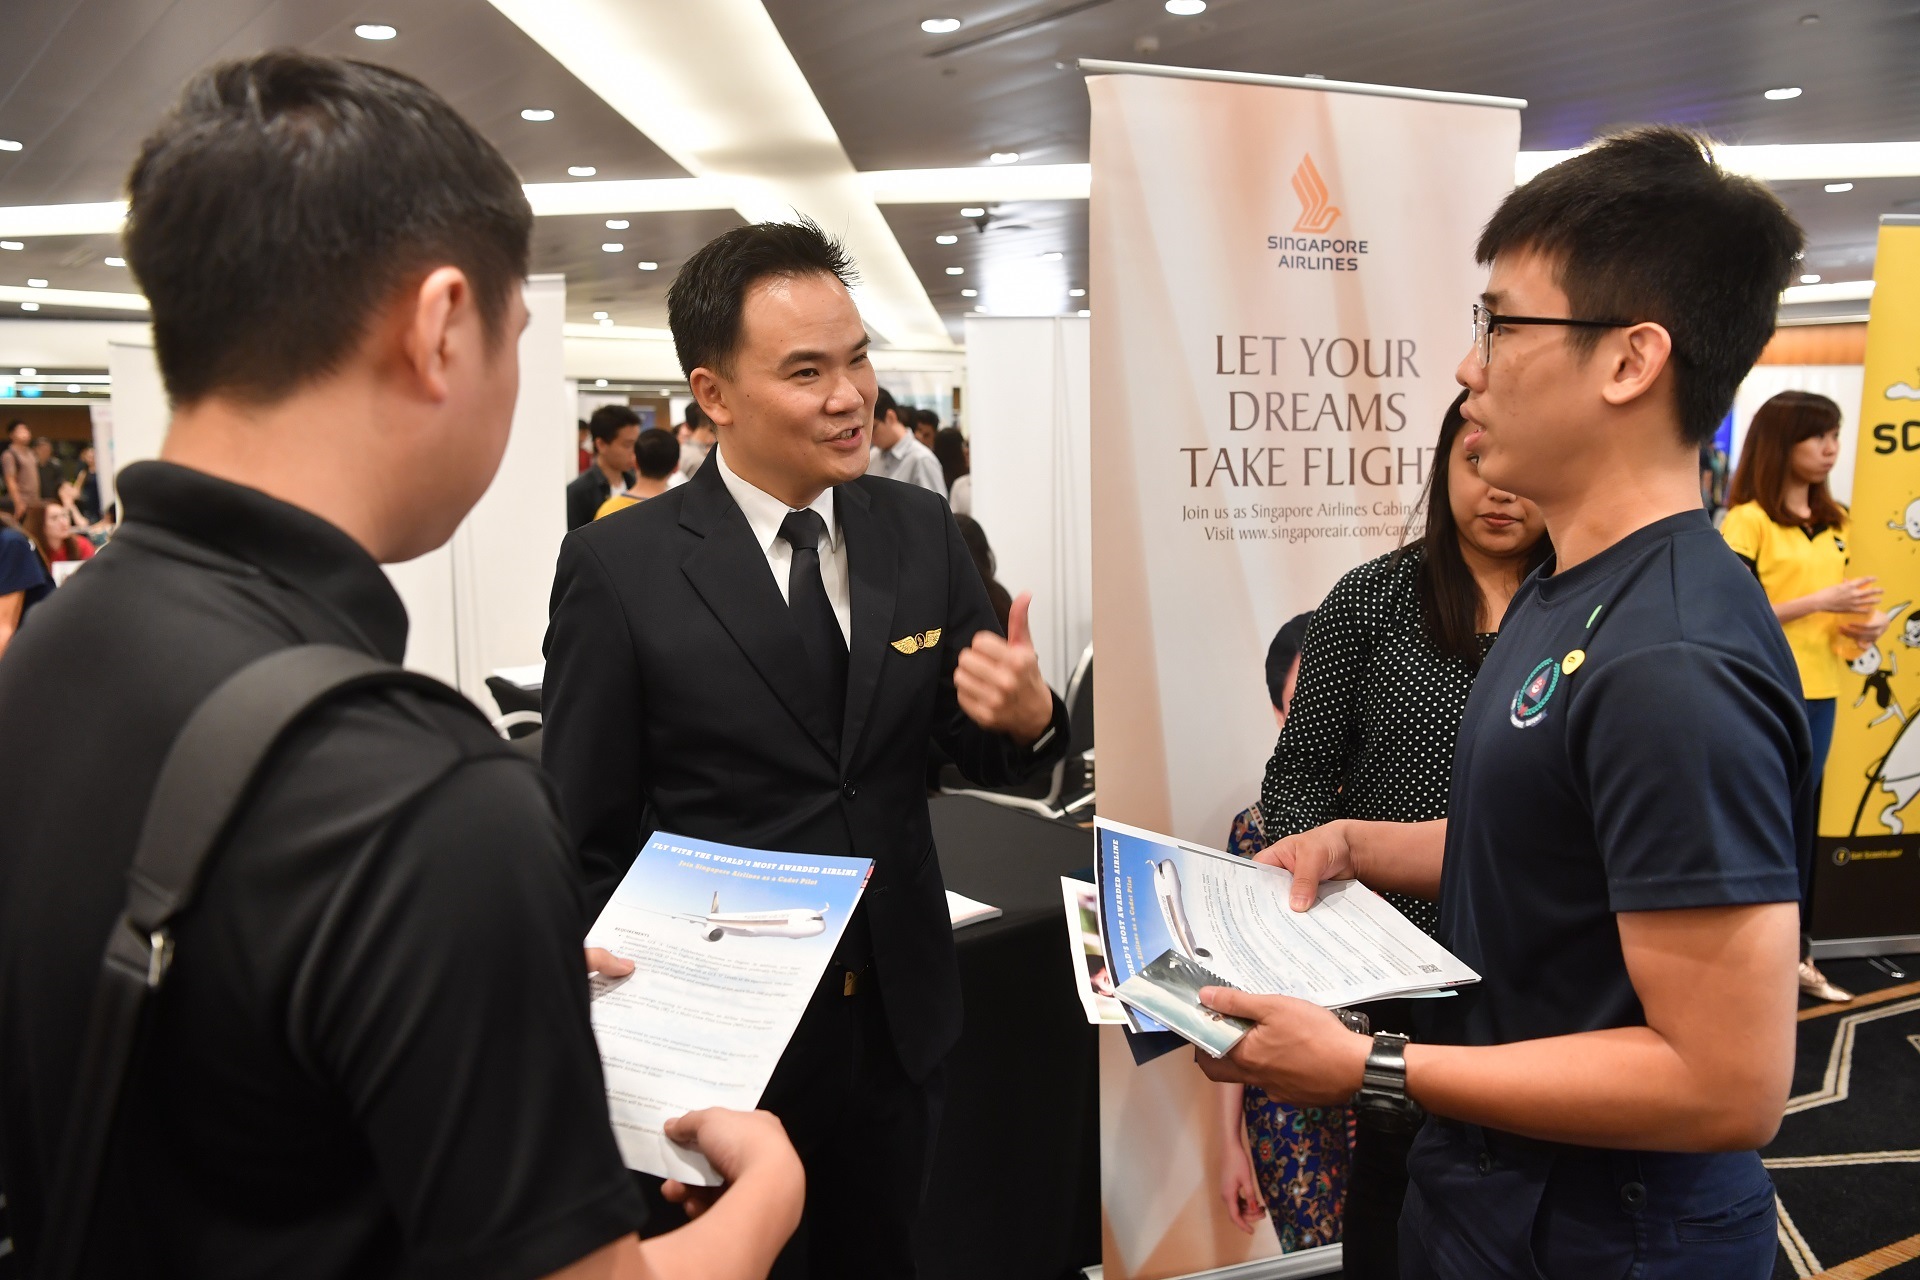 New initiatives to guide NSFs on career and education